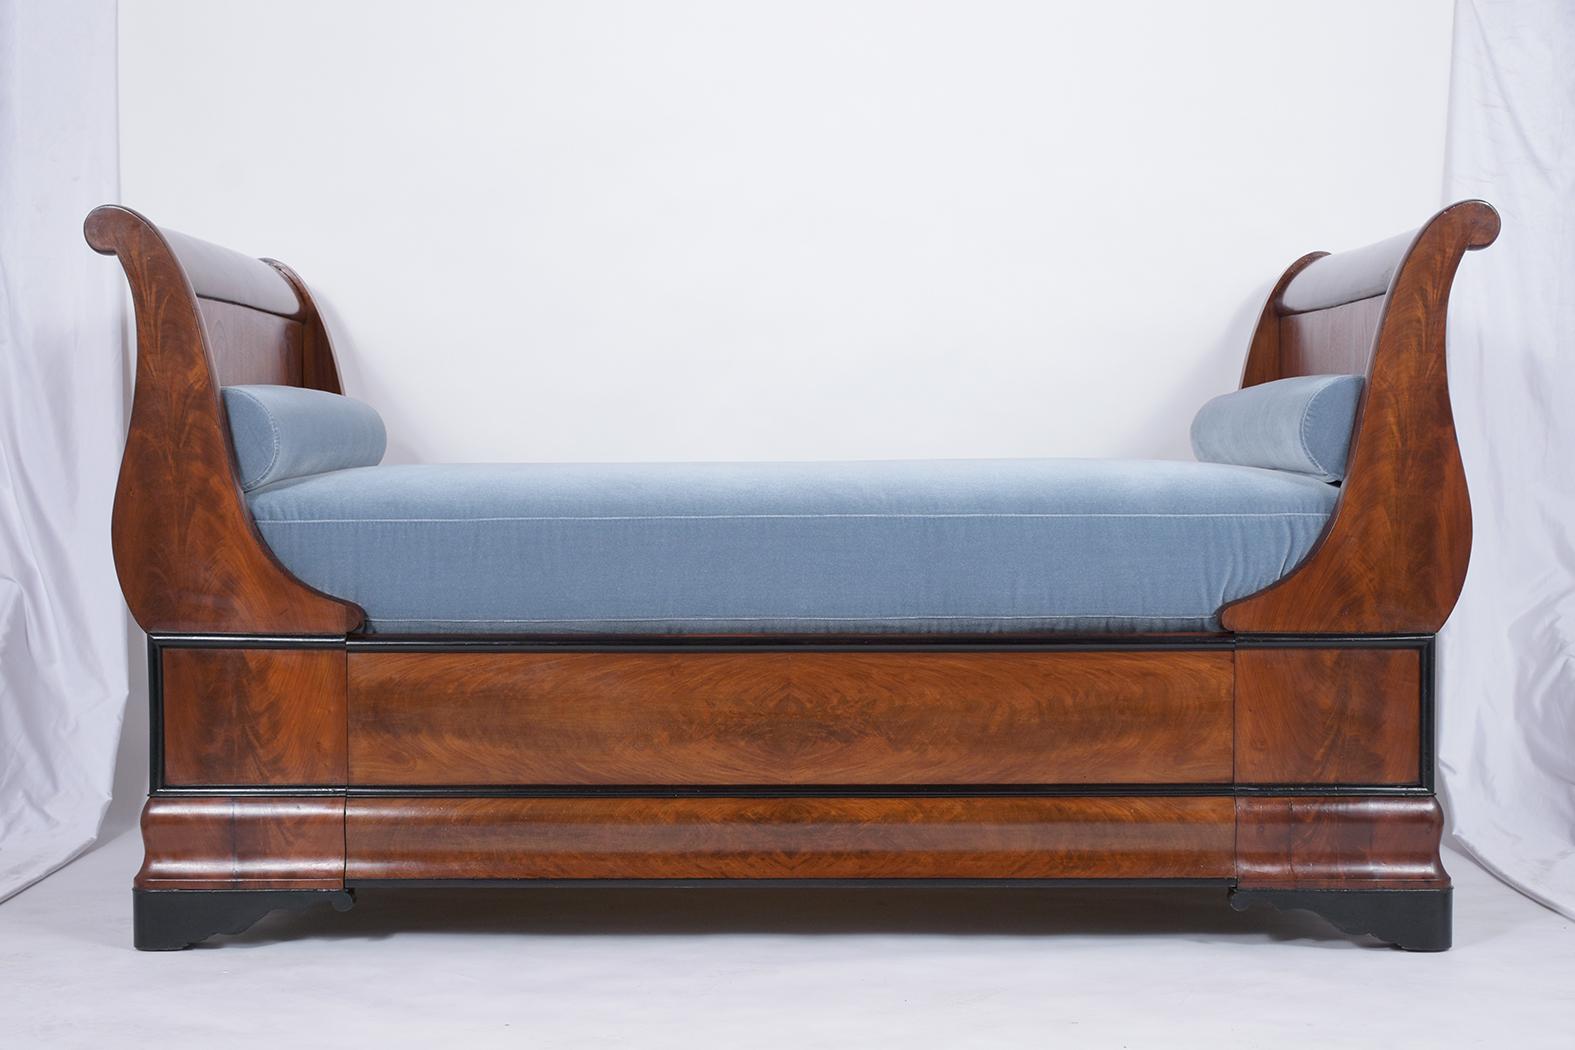 This circa 1830s French Empire daybed has been professionally restored, is crafted out of mahogany wood, and features a solid frame finished in its original rich mahogany finish with ebonized molding details along the edges. This daybed comes with a